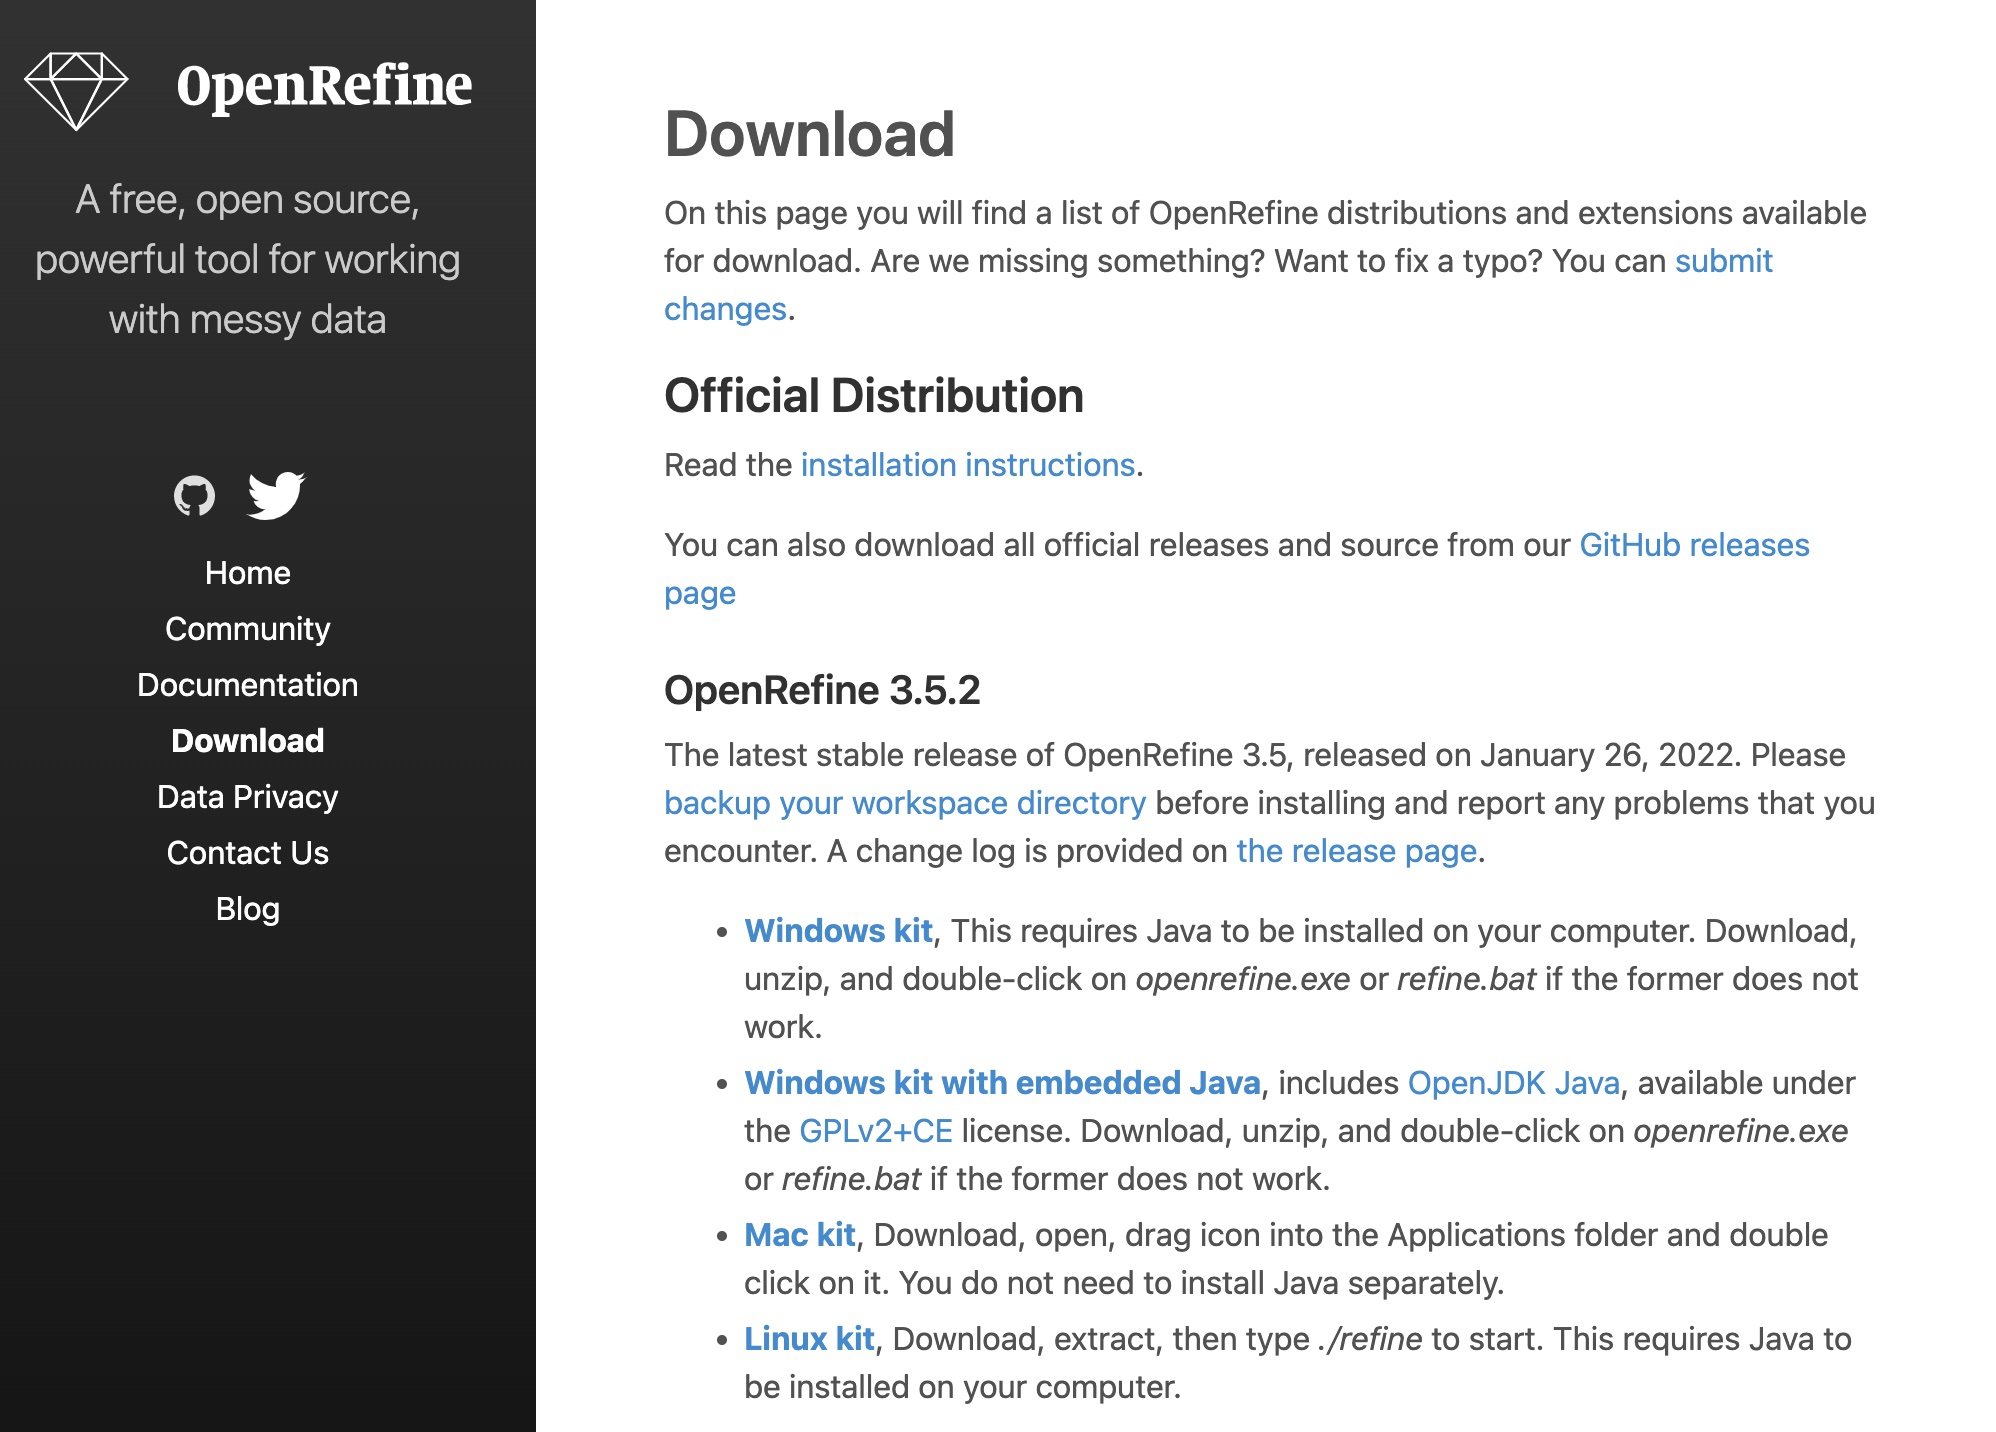 The Download page for Google's OpenRefine